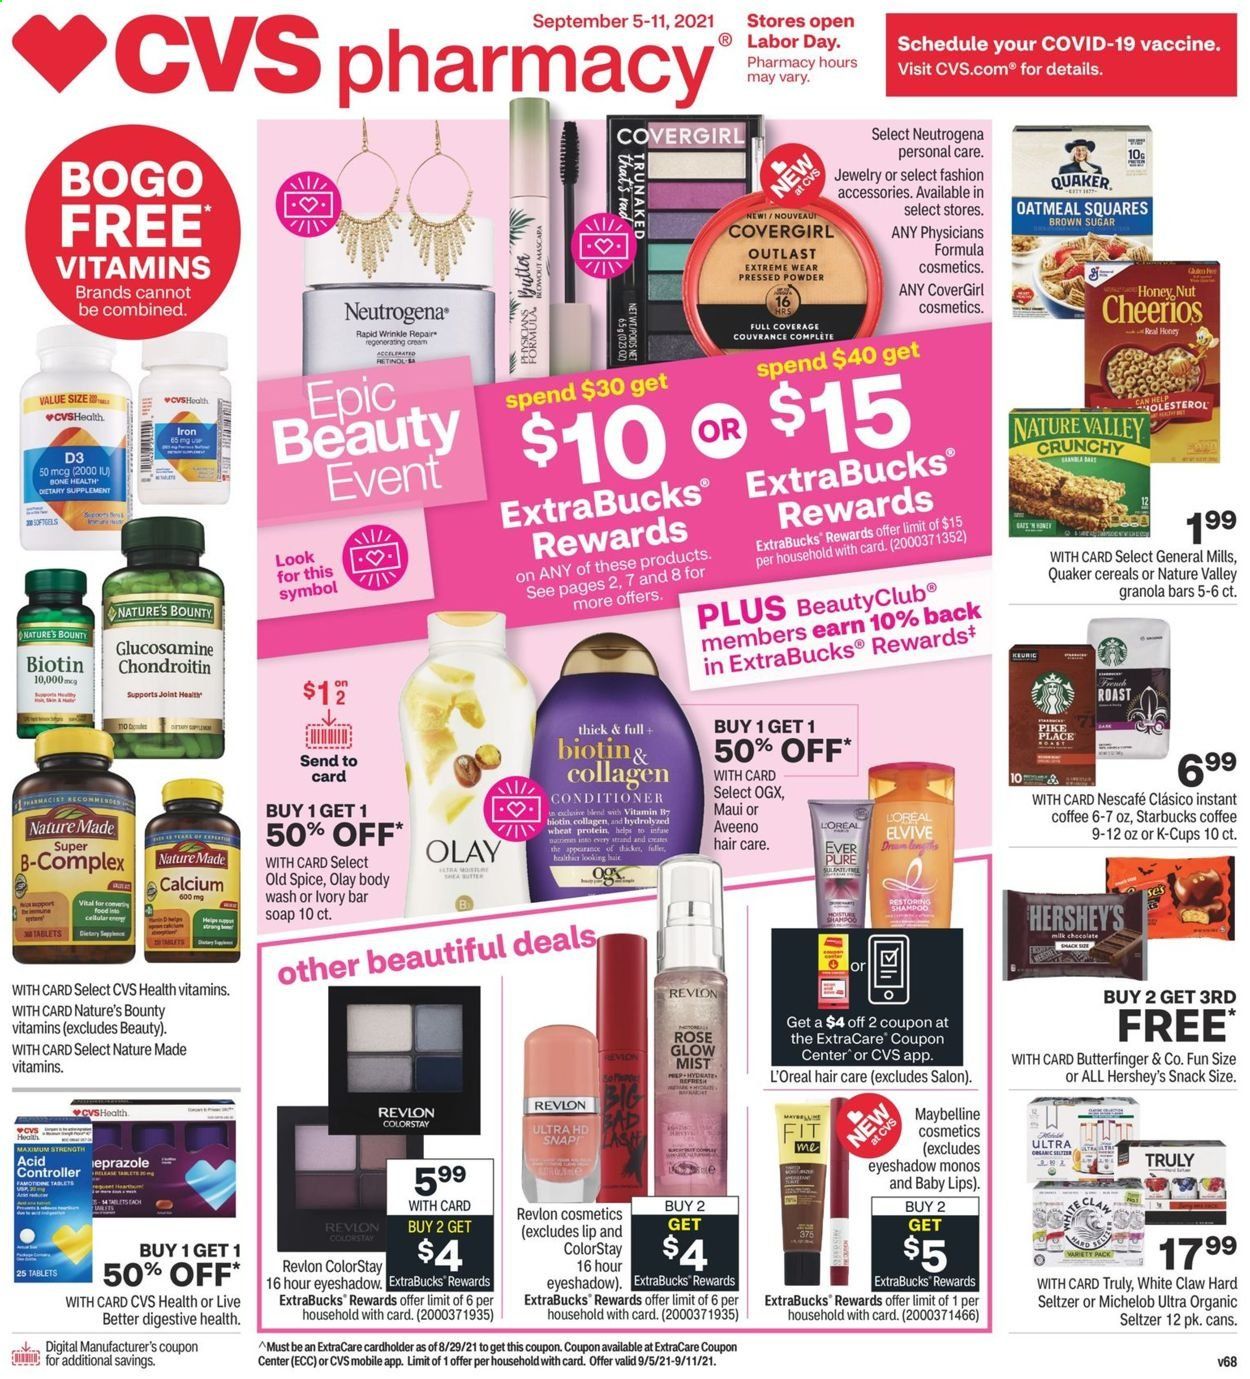 thumbnail - CVS Pharmacy Flyer - 09/05/2021 - 09/11/2021 - Sales products - Quaker, Hershey's, snack, cereals, Cheerios, oatmeal, granola bar, Nature Valley, Starbucks, instant coffee, Nescafé, coffee capsules, K-Cups, wine, White Claw, Hard Seltzer, TRULY, Aveeno, body wash, Old Spice, soap bar, soap, L’Oréal, Neutrogena, Olay, OGX, conditioner, Revlon, Maybelline, Biotin, calcium, glucosamine, Nature Made, Nature's Bounty, vitamin D3, dietary supplement, beer, eyeshadow, face powder, Michelob. Page 1.